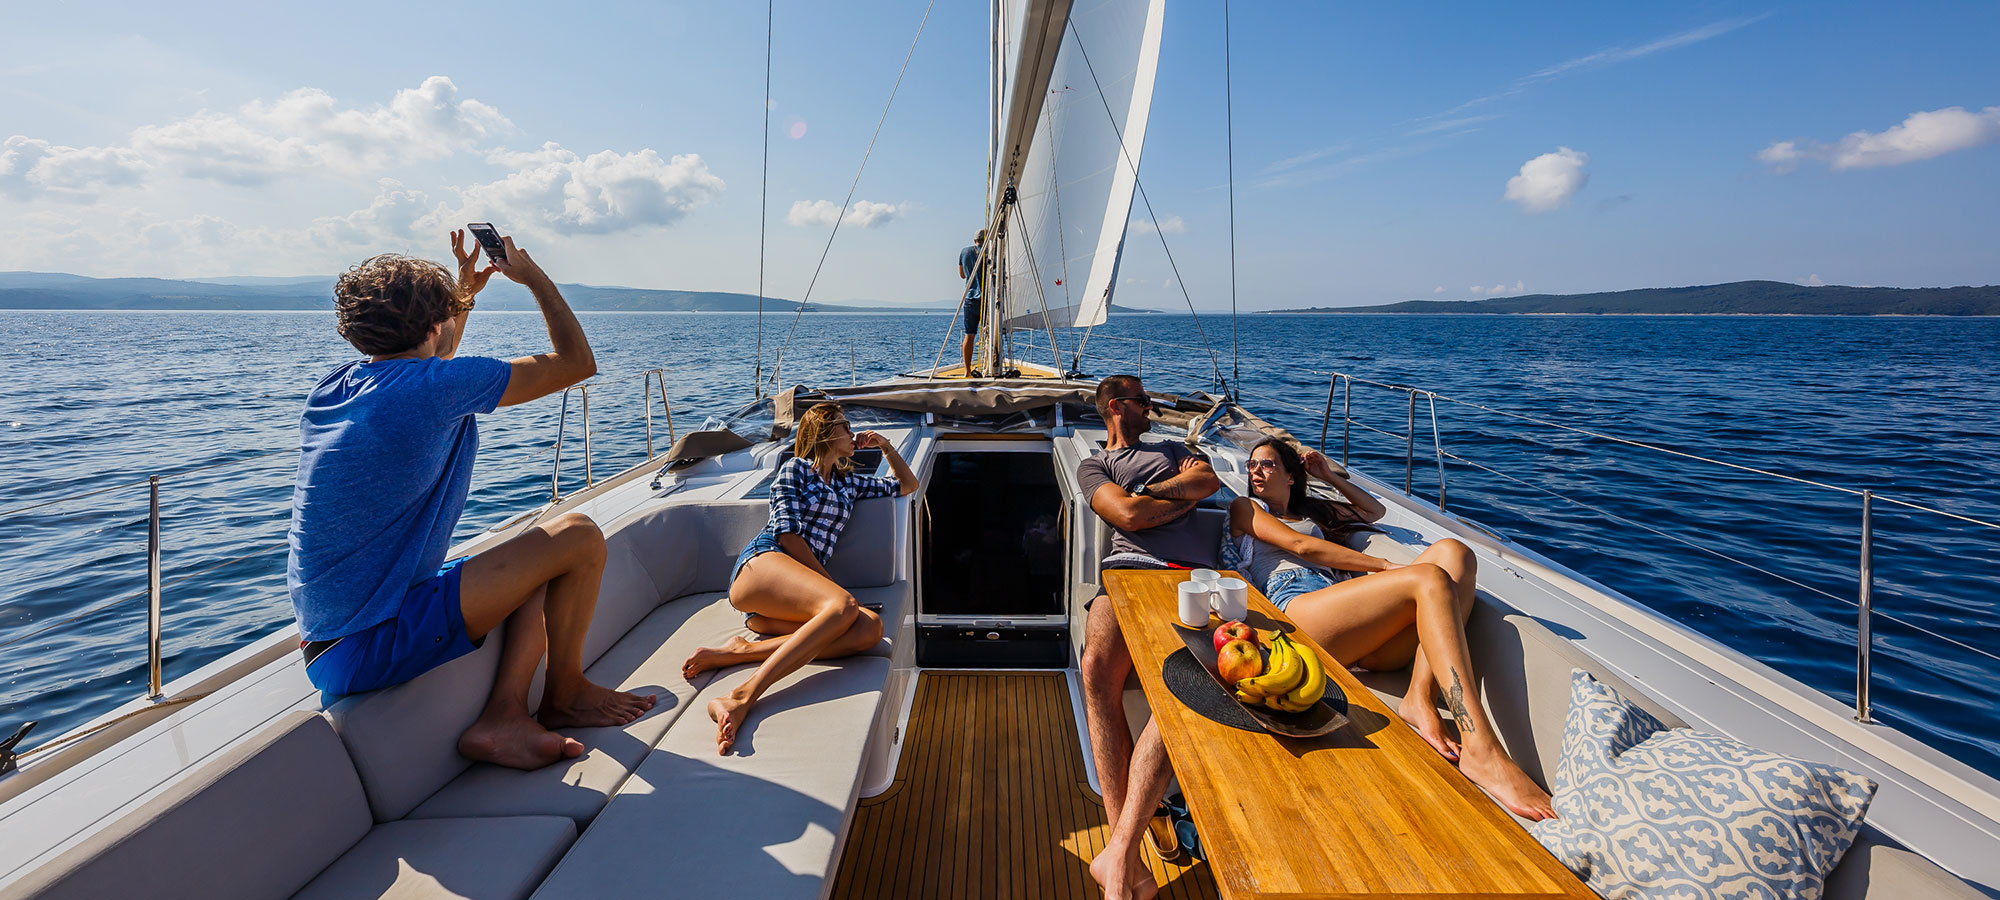 Hiring a Hostess for your Yacht Charter, How Does it Work?